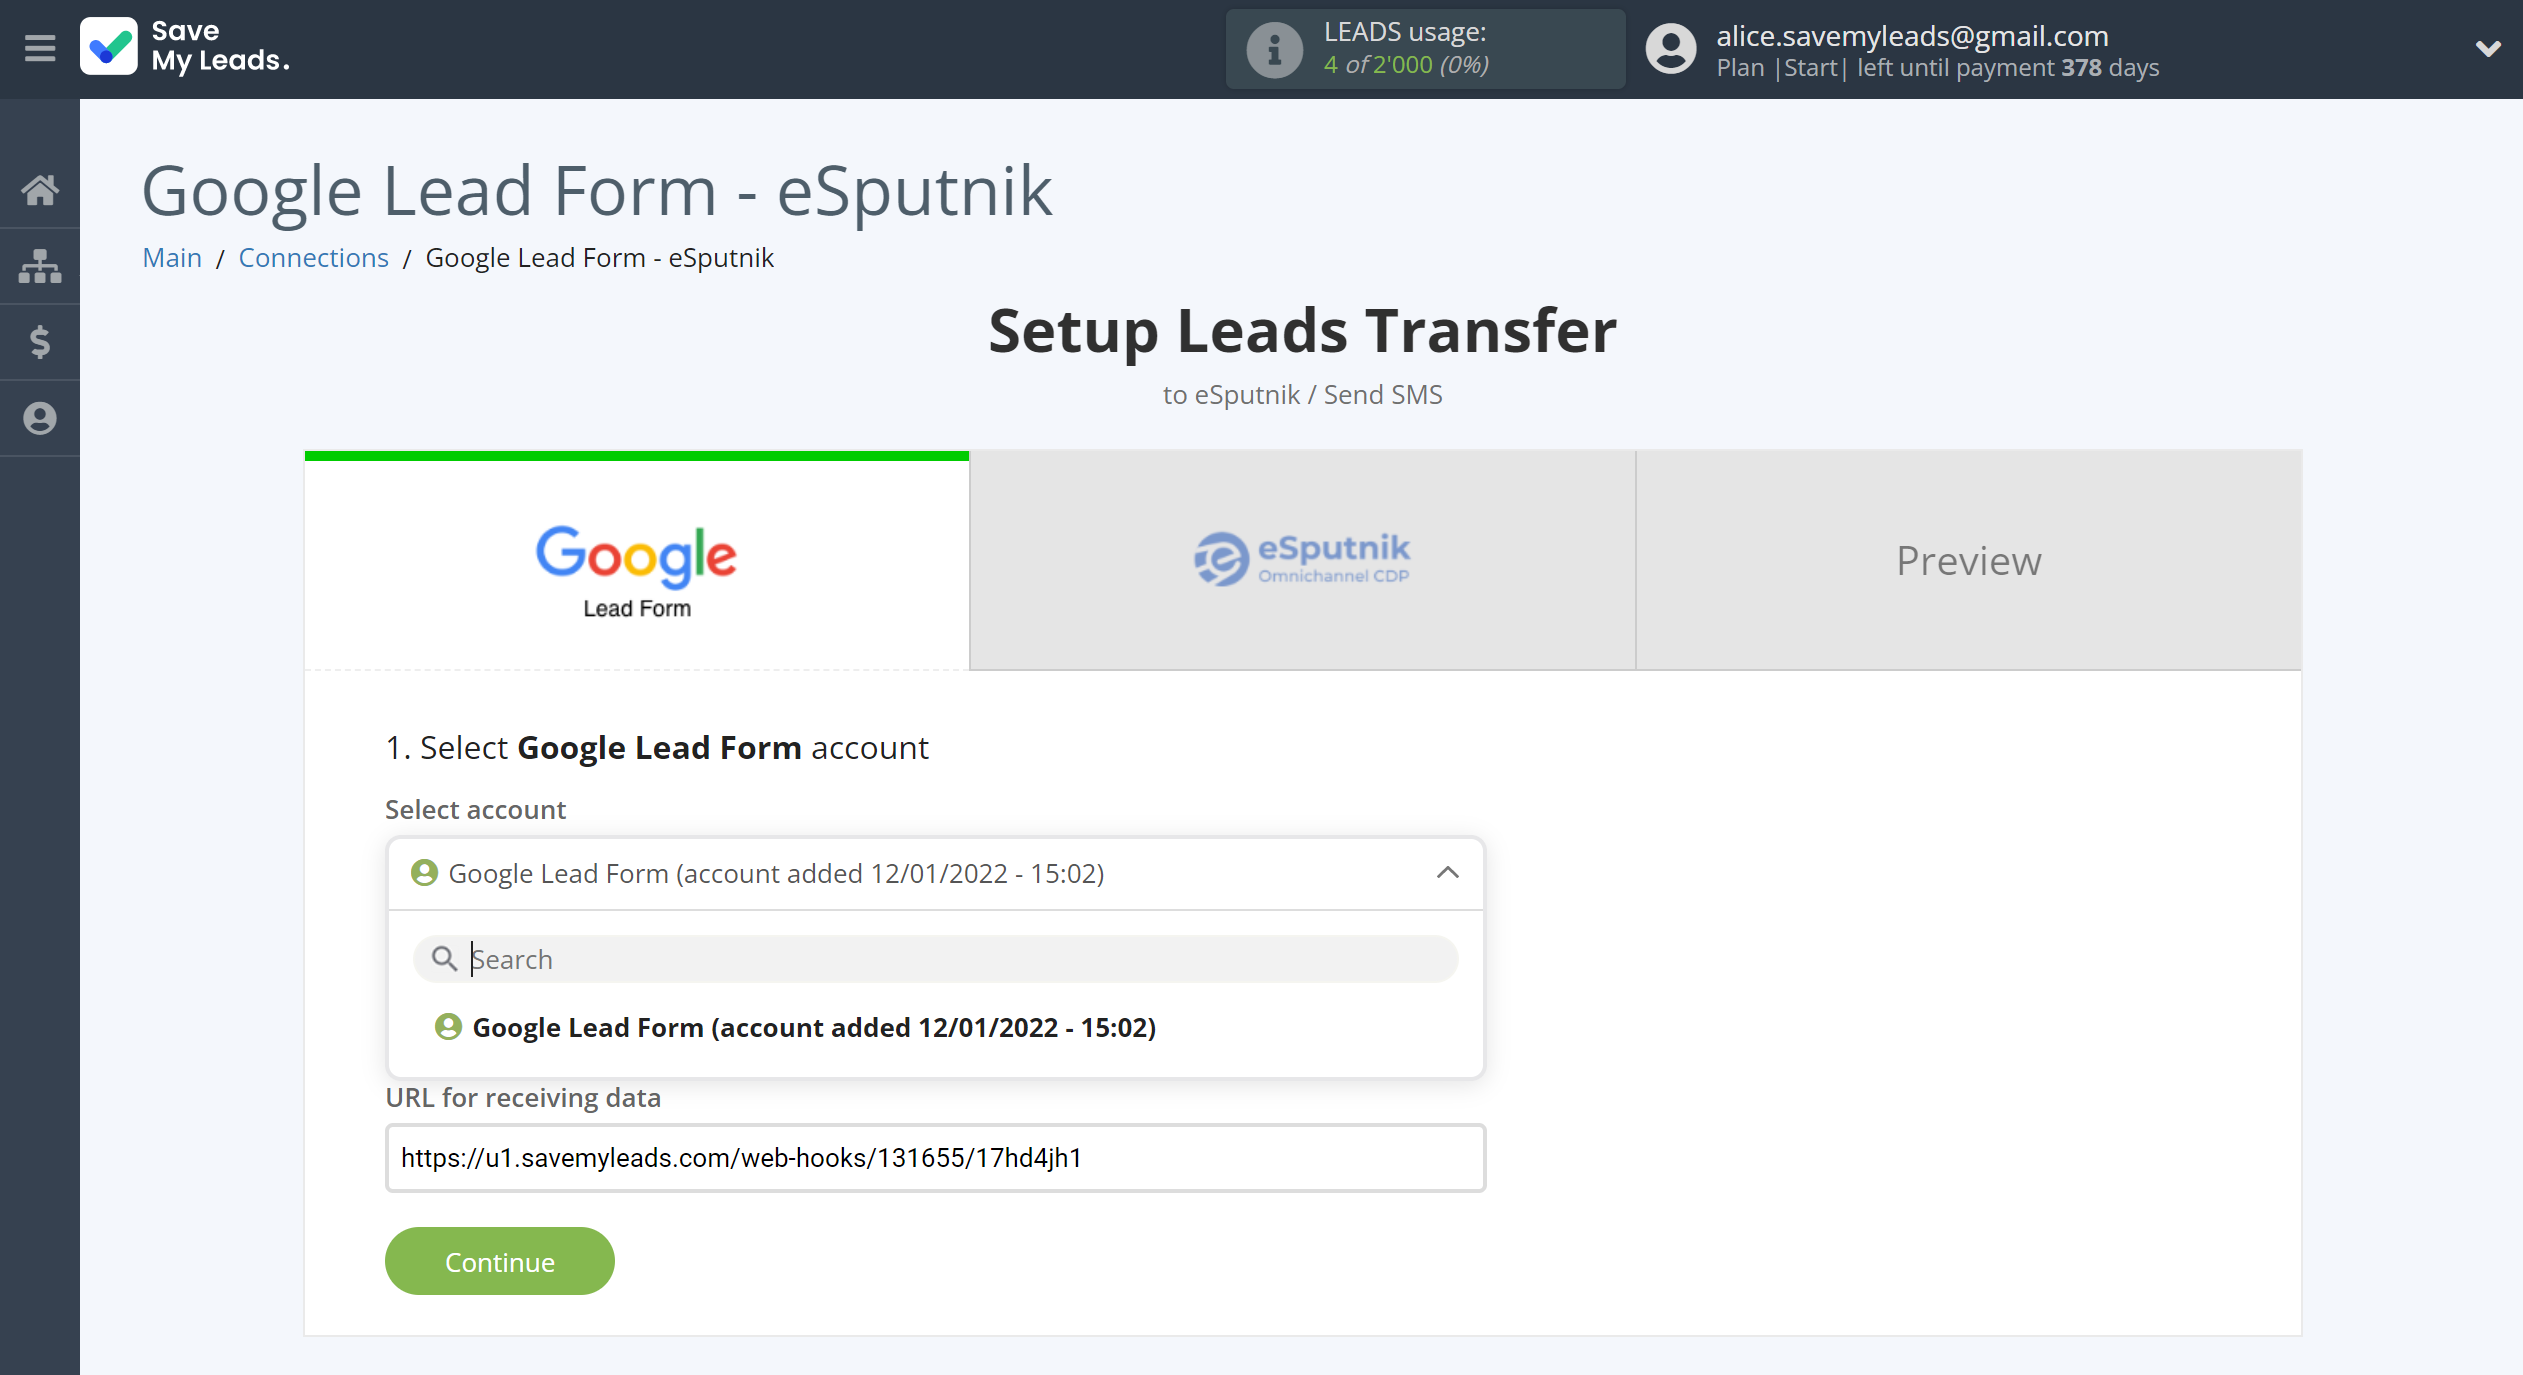 How to Connect Google Lead Form with eSputnik Send SMS | Data Source account selection